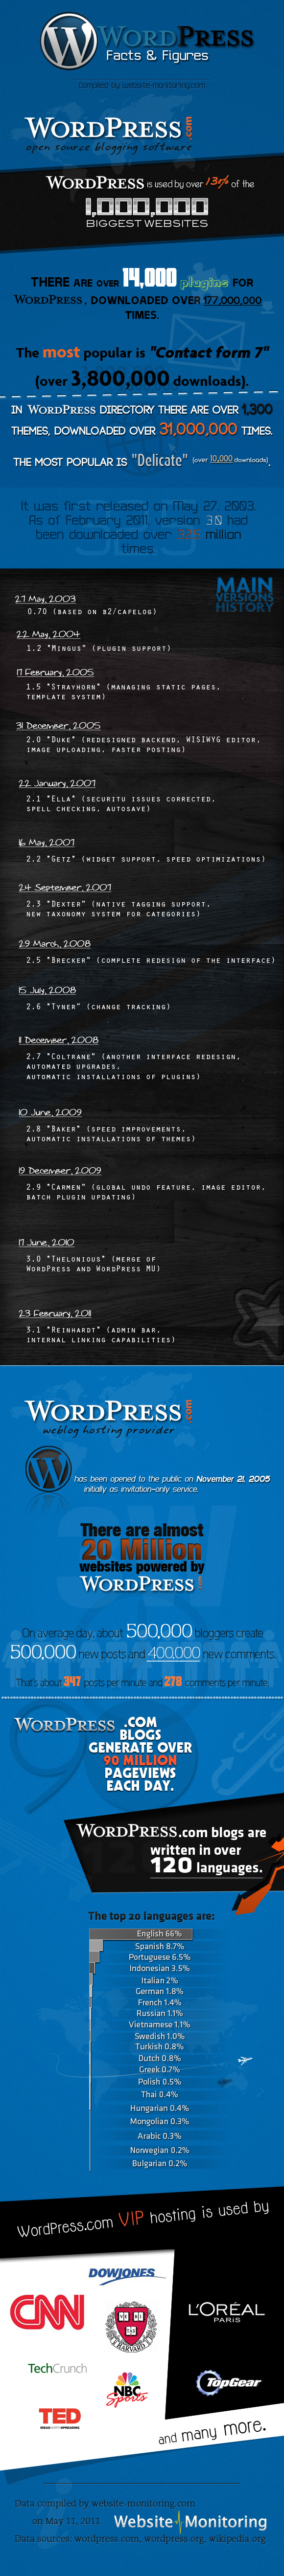 WordPress facts and figures